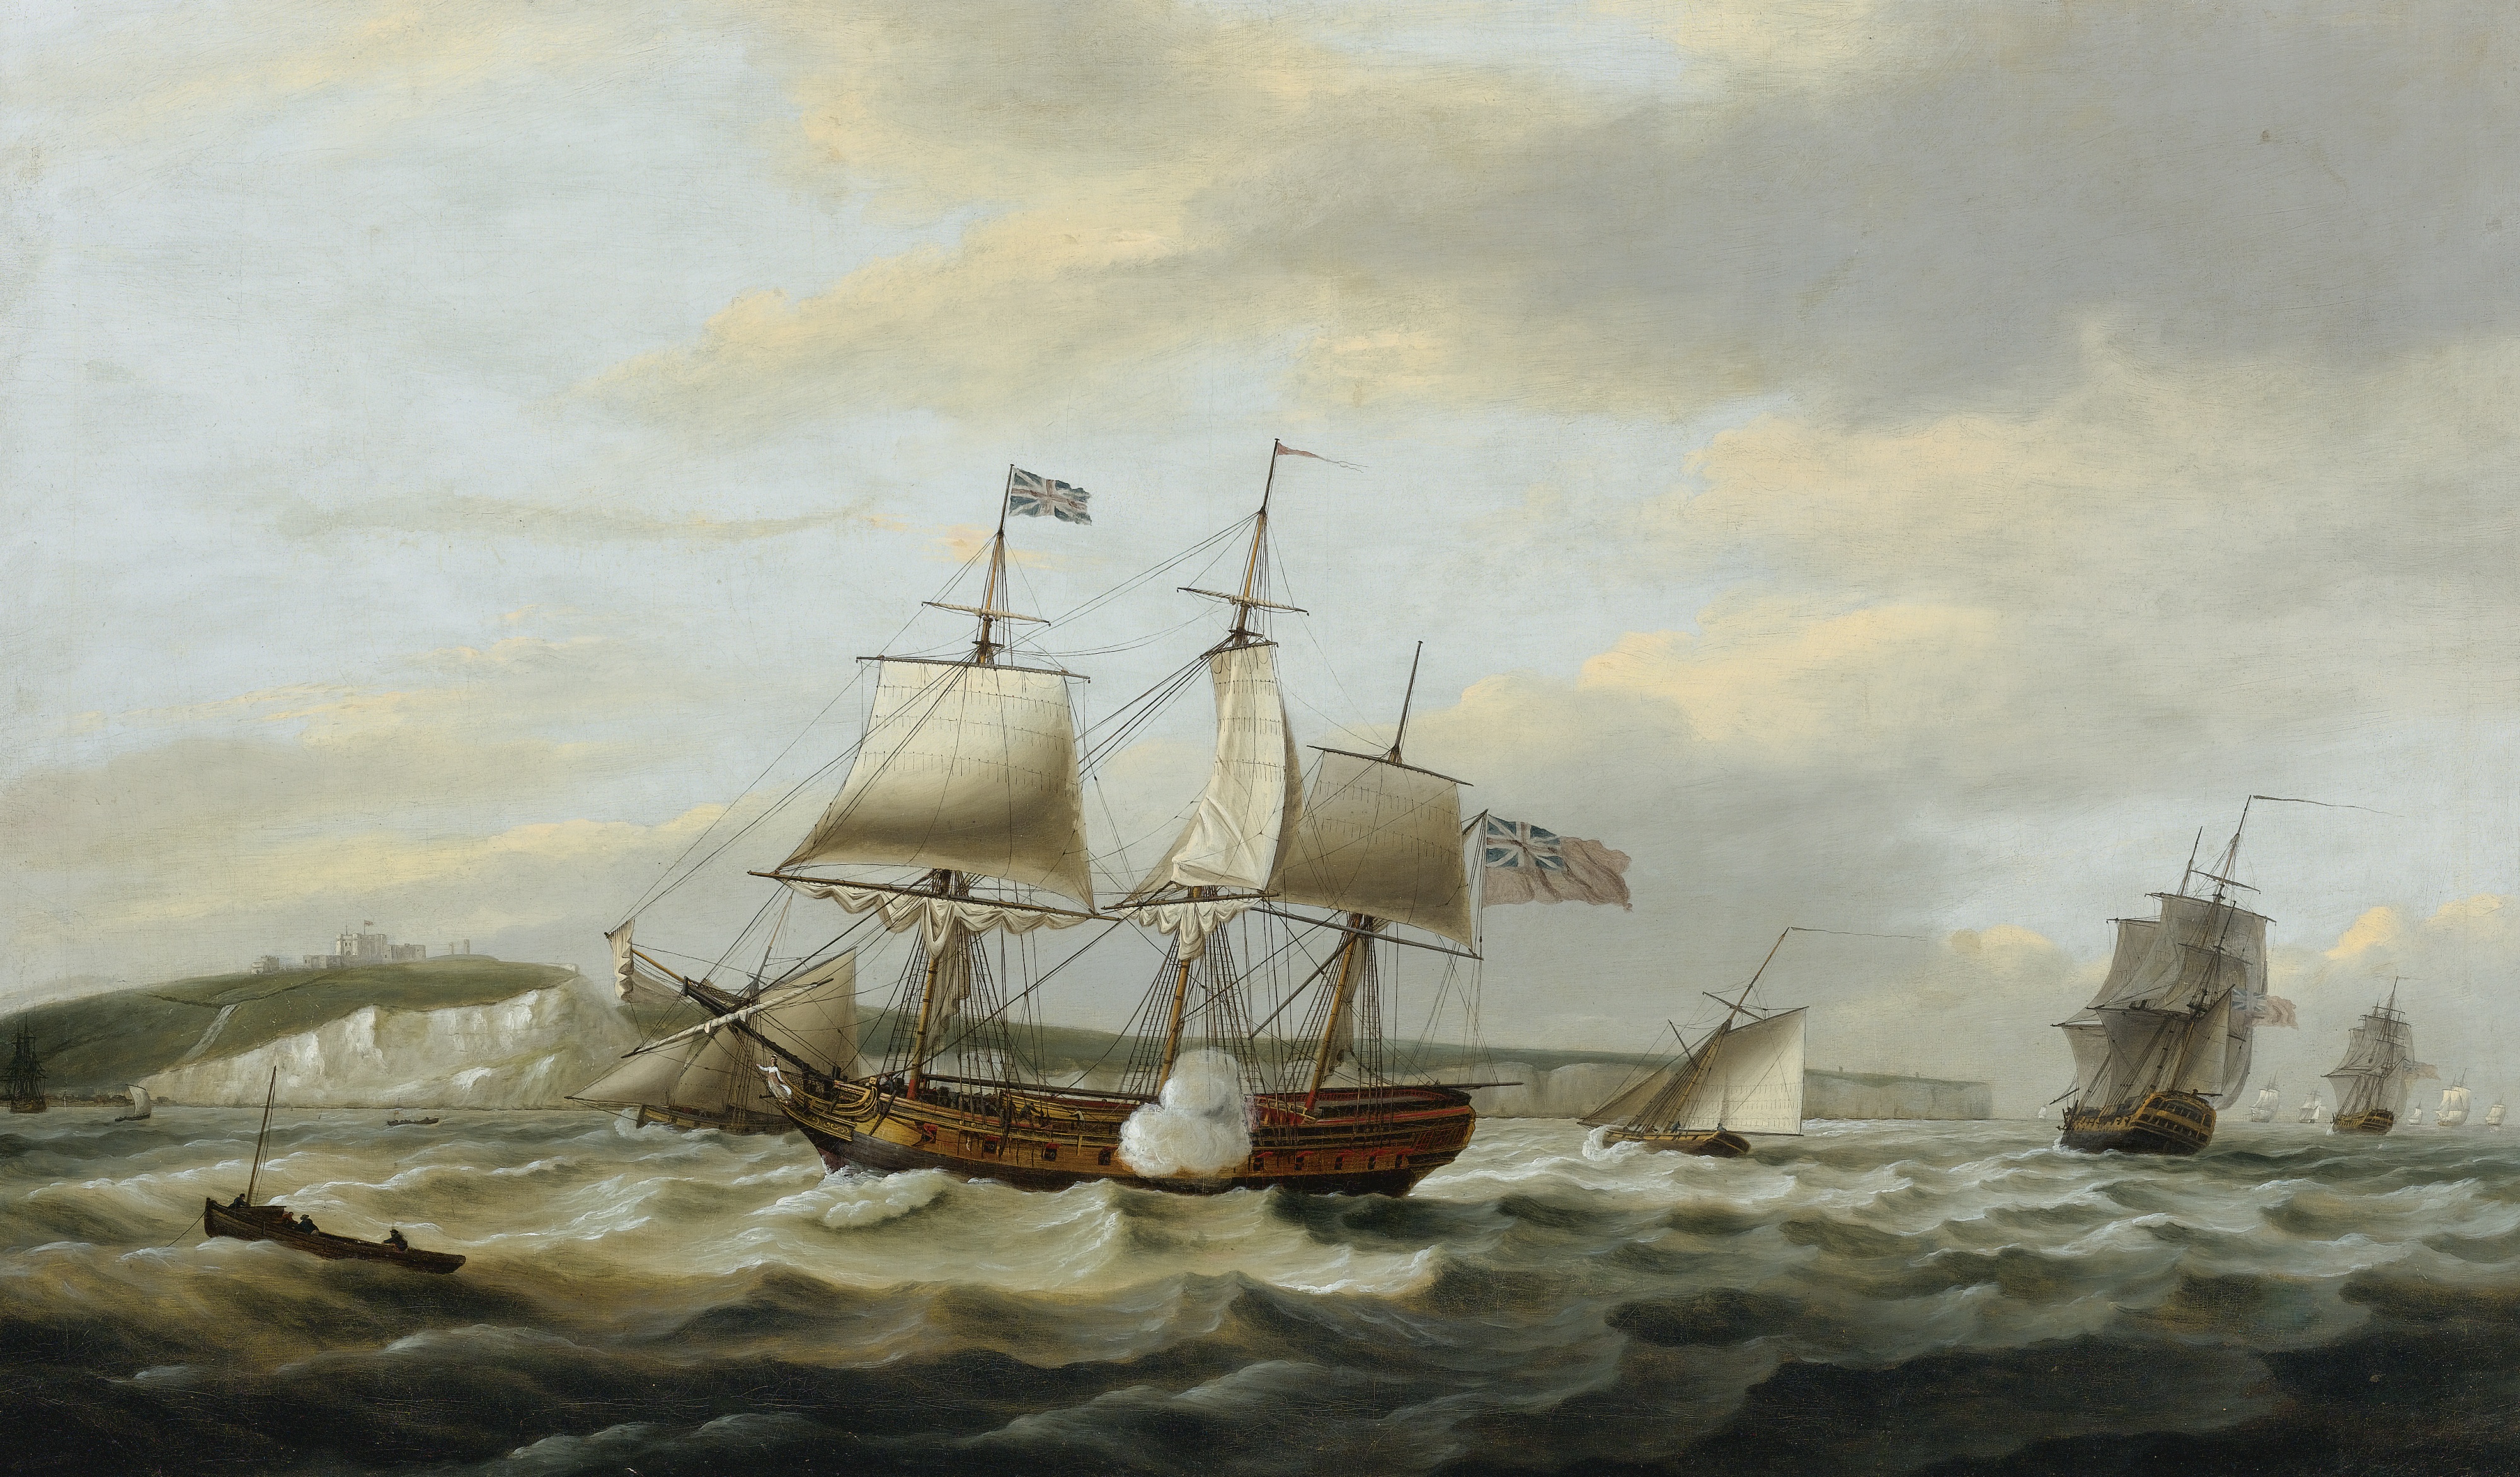 Thomas Luny, Nature, Landscape, Sea, Cliff, Coastline, Cliffs of Dover, England, UK, Sailing ship, Boat, Painting, Classical art, Traditional art, Artwork, Waves Wallpaper